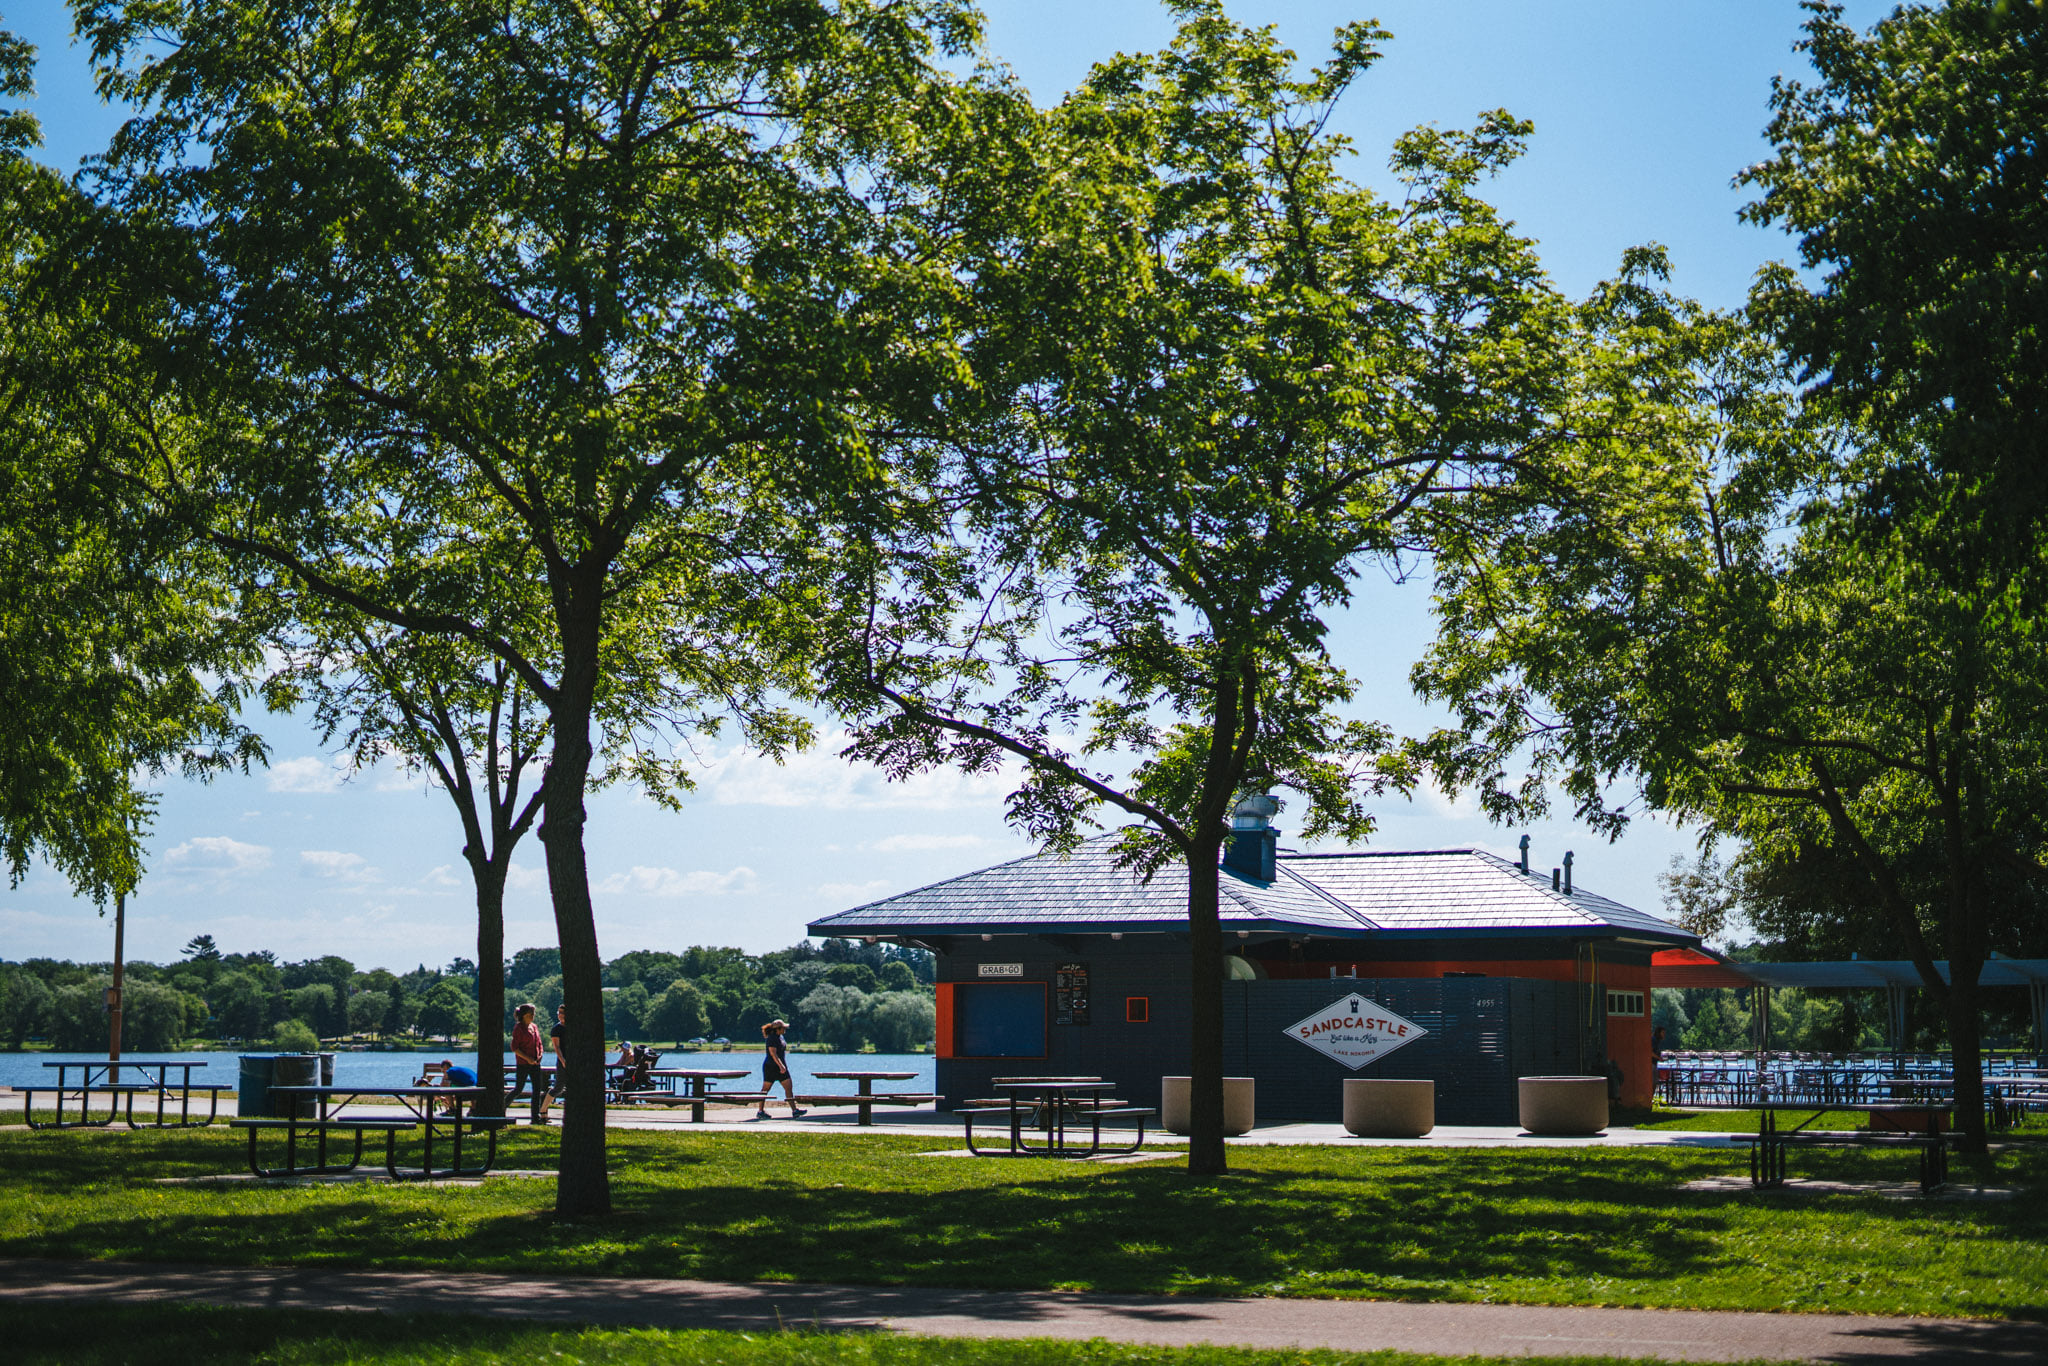 An exterior shot of Sandcastle, with lush green trees in the foreground and Lake Nokomis in the background